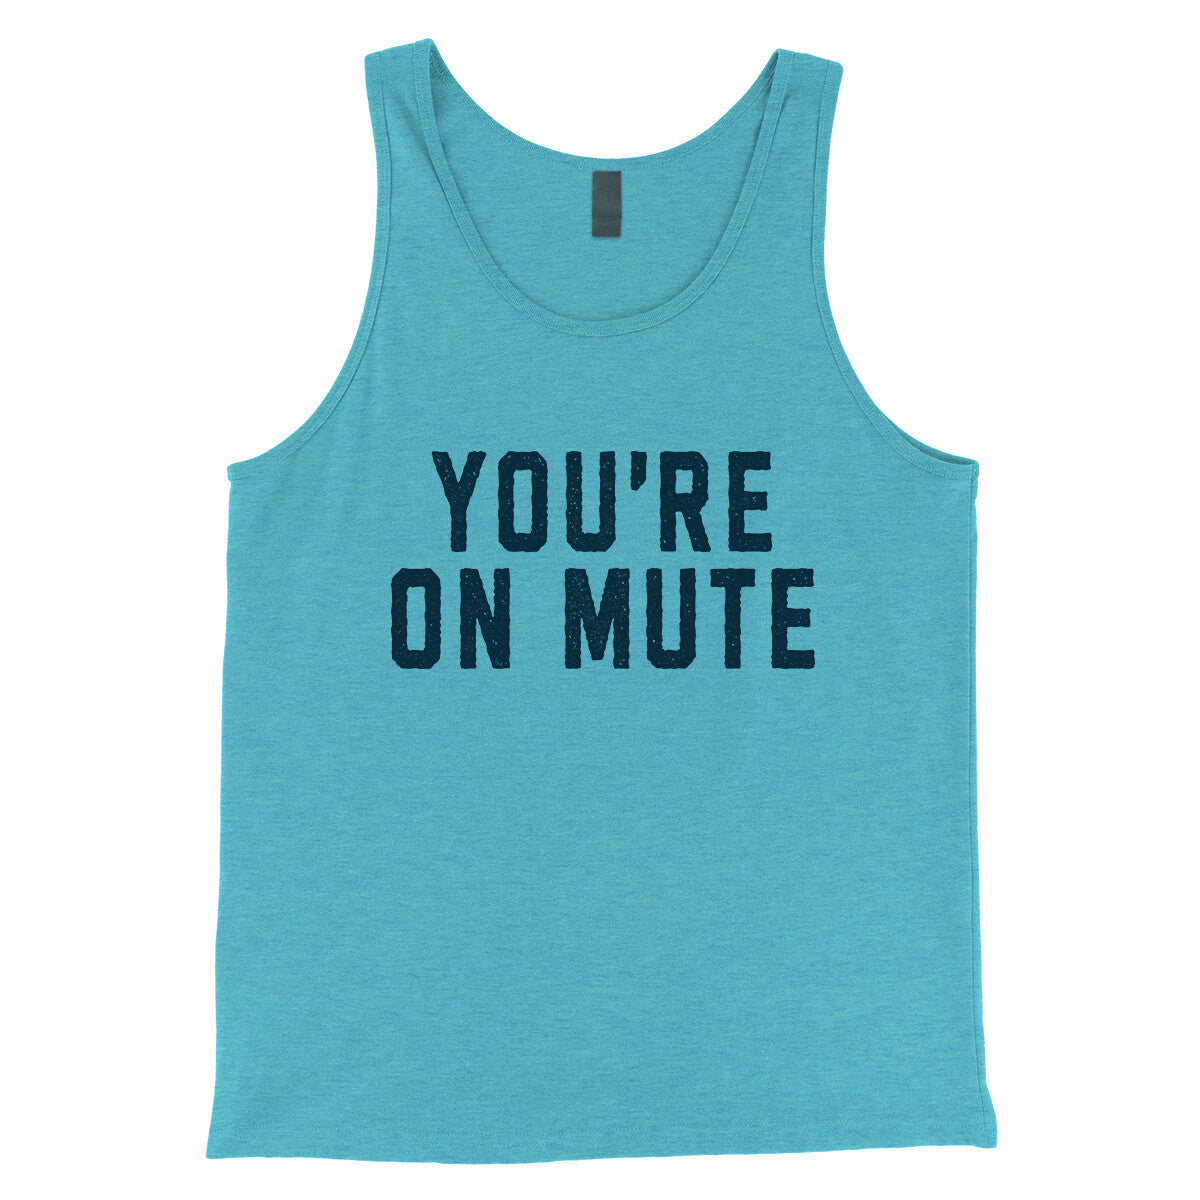 You're on Mute in Aqua Triblend Color